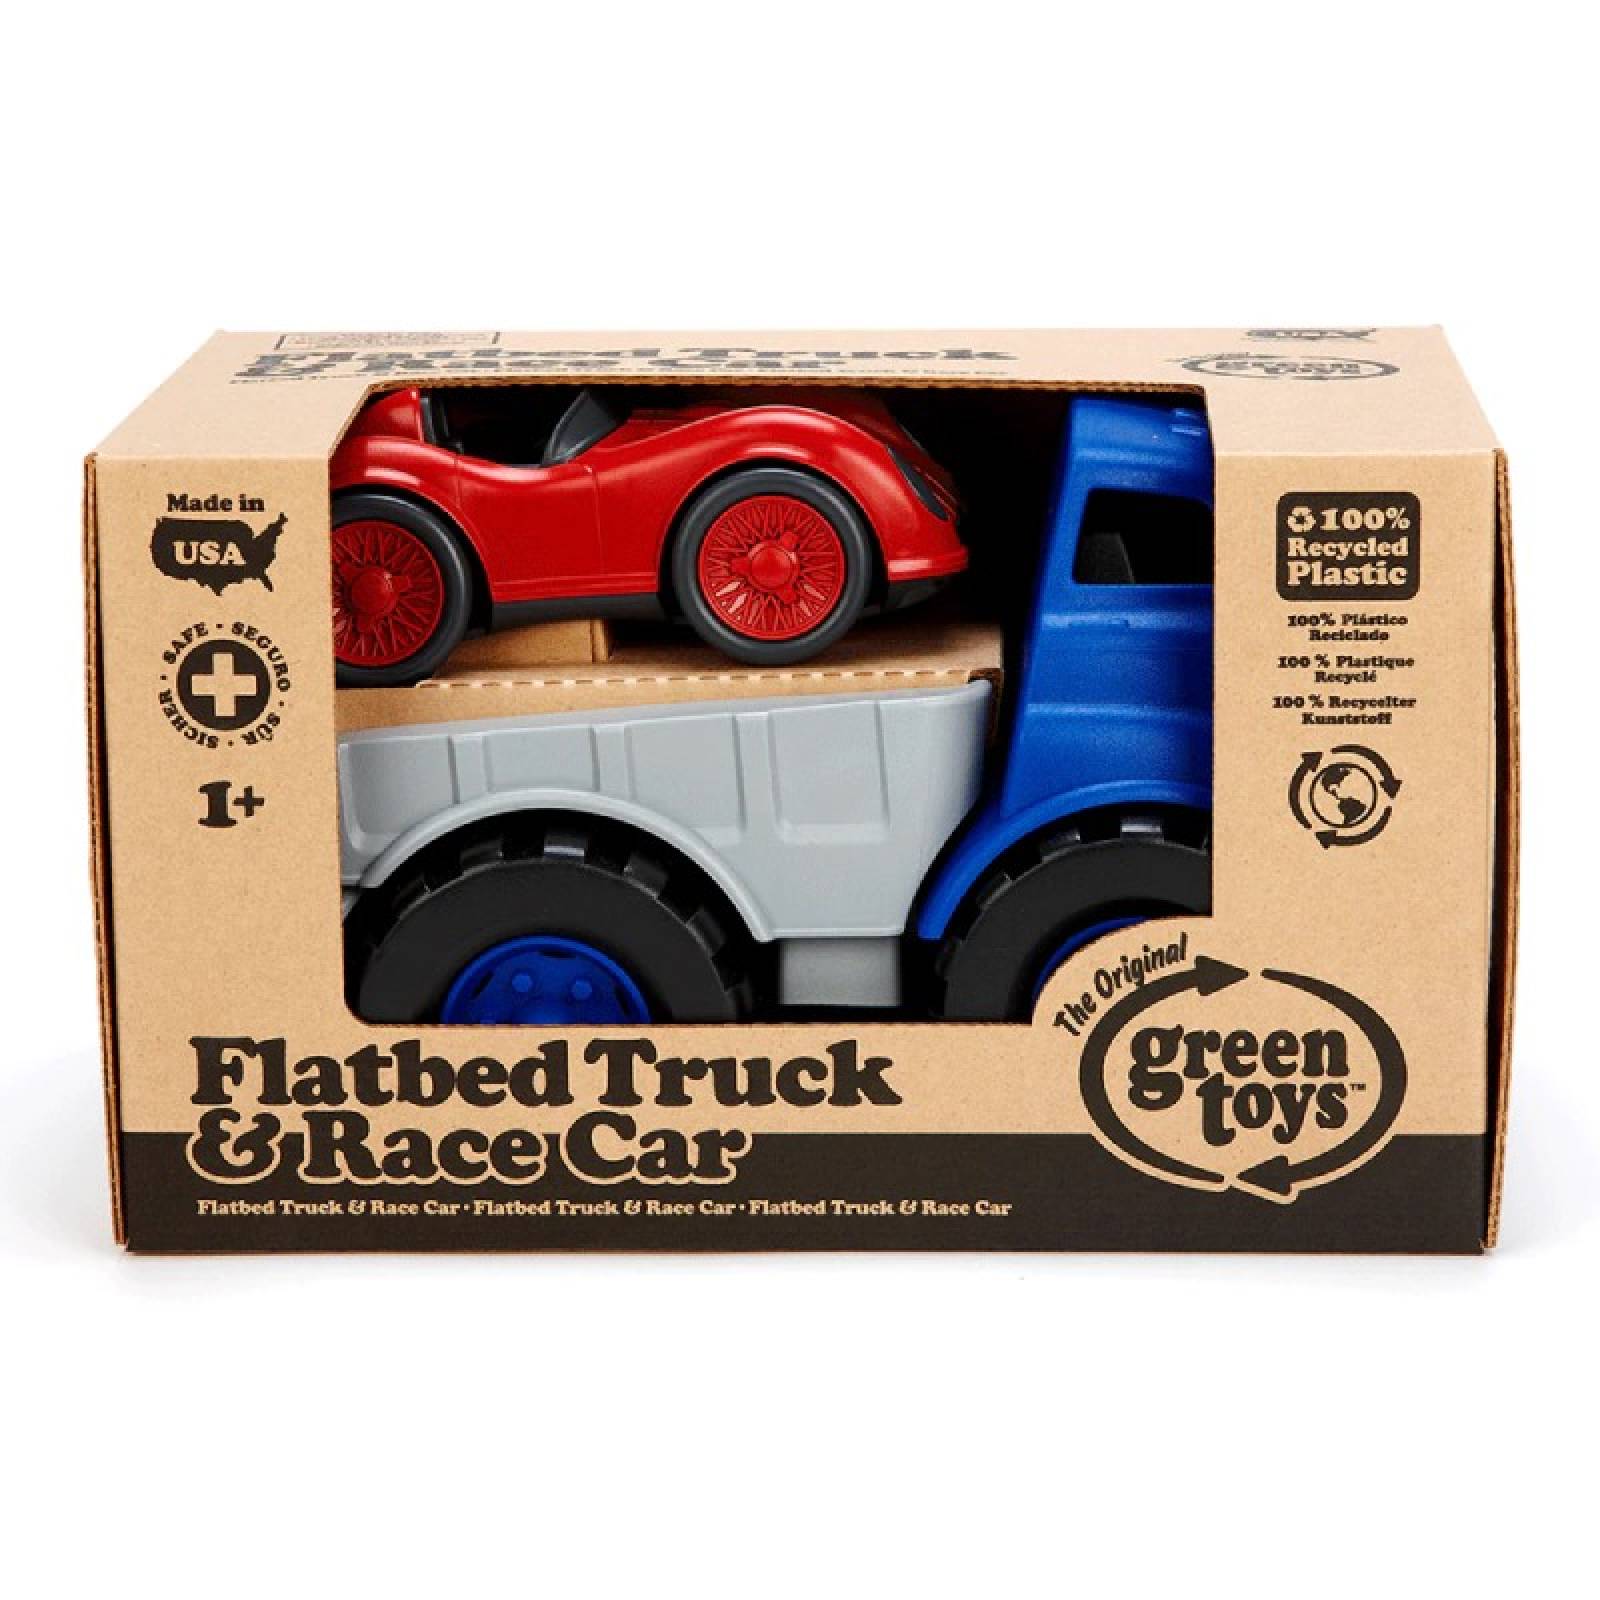 Flatbed Truck with Red Race Car By Green Toys 1+ thumbnails